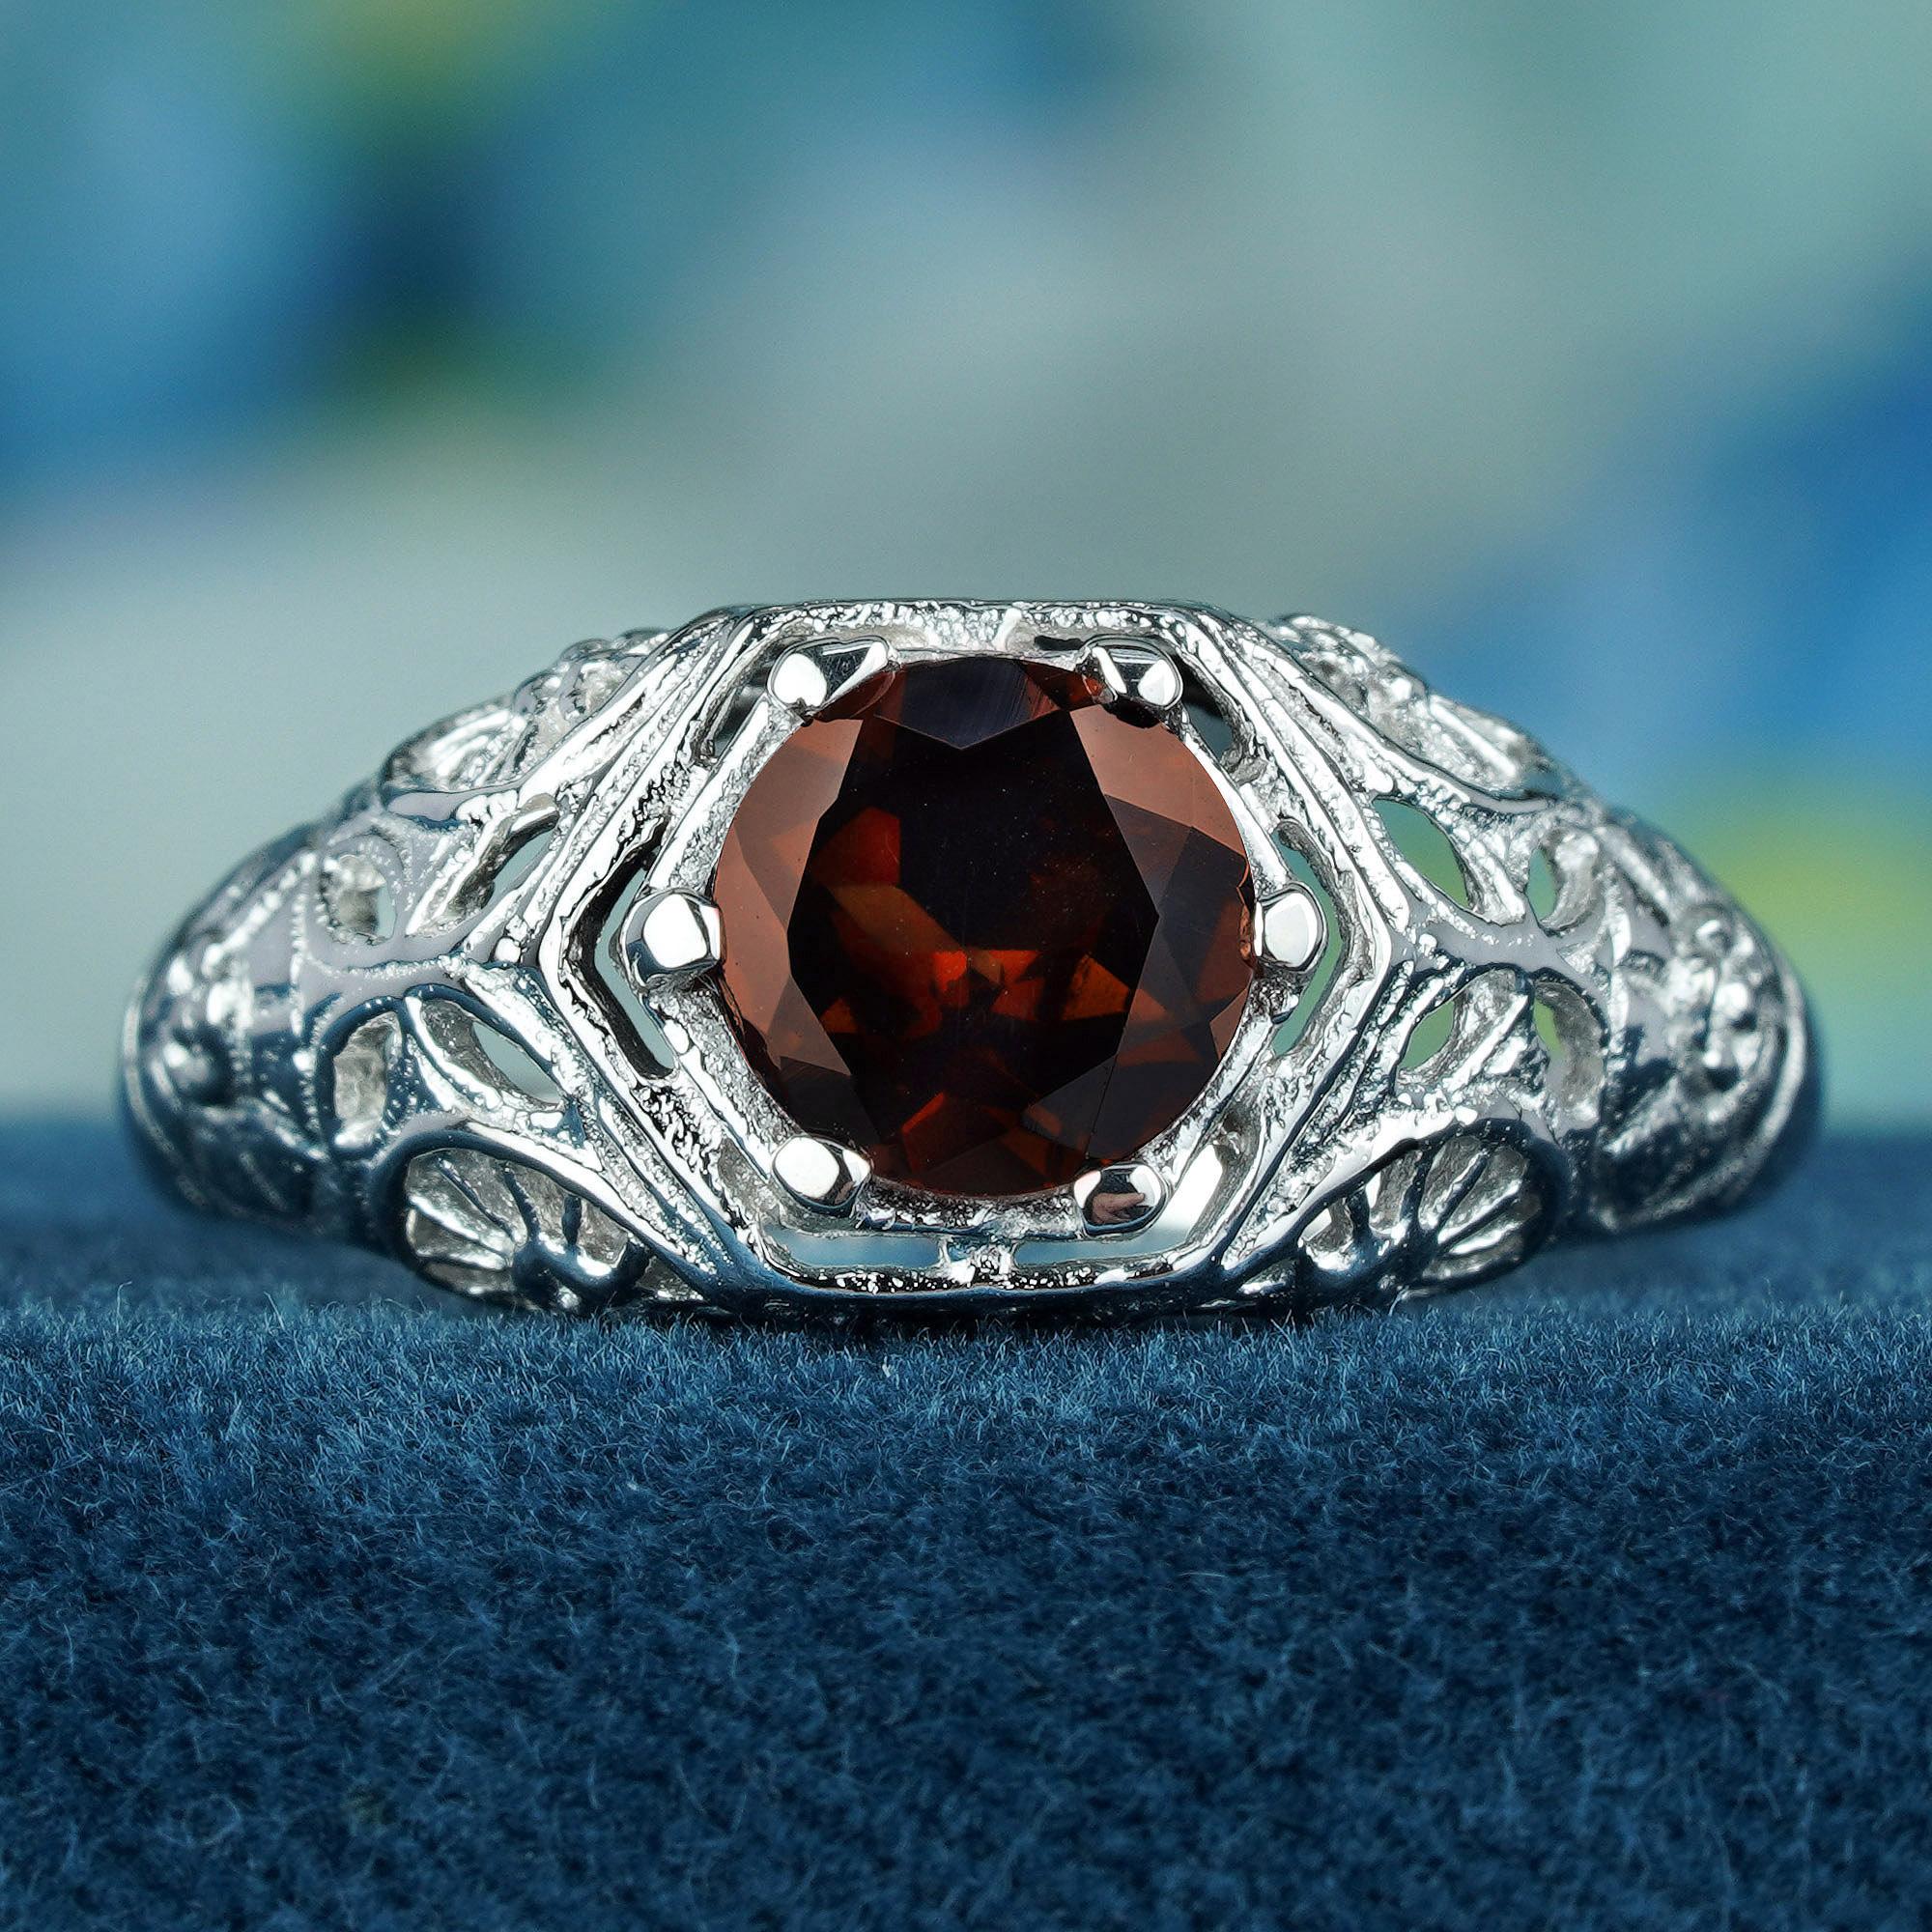 The ring is crafted from solid white gold, giving it a cool, timeless feel. The wide, flat shank tapers gently towards the red garnet in a prong setting, adding a touch of elegance and proportion. The intricate floral design that graces the entire